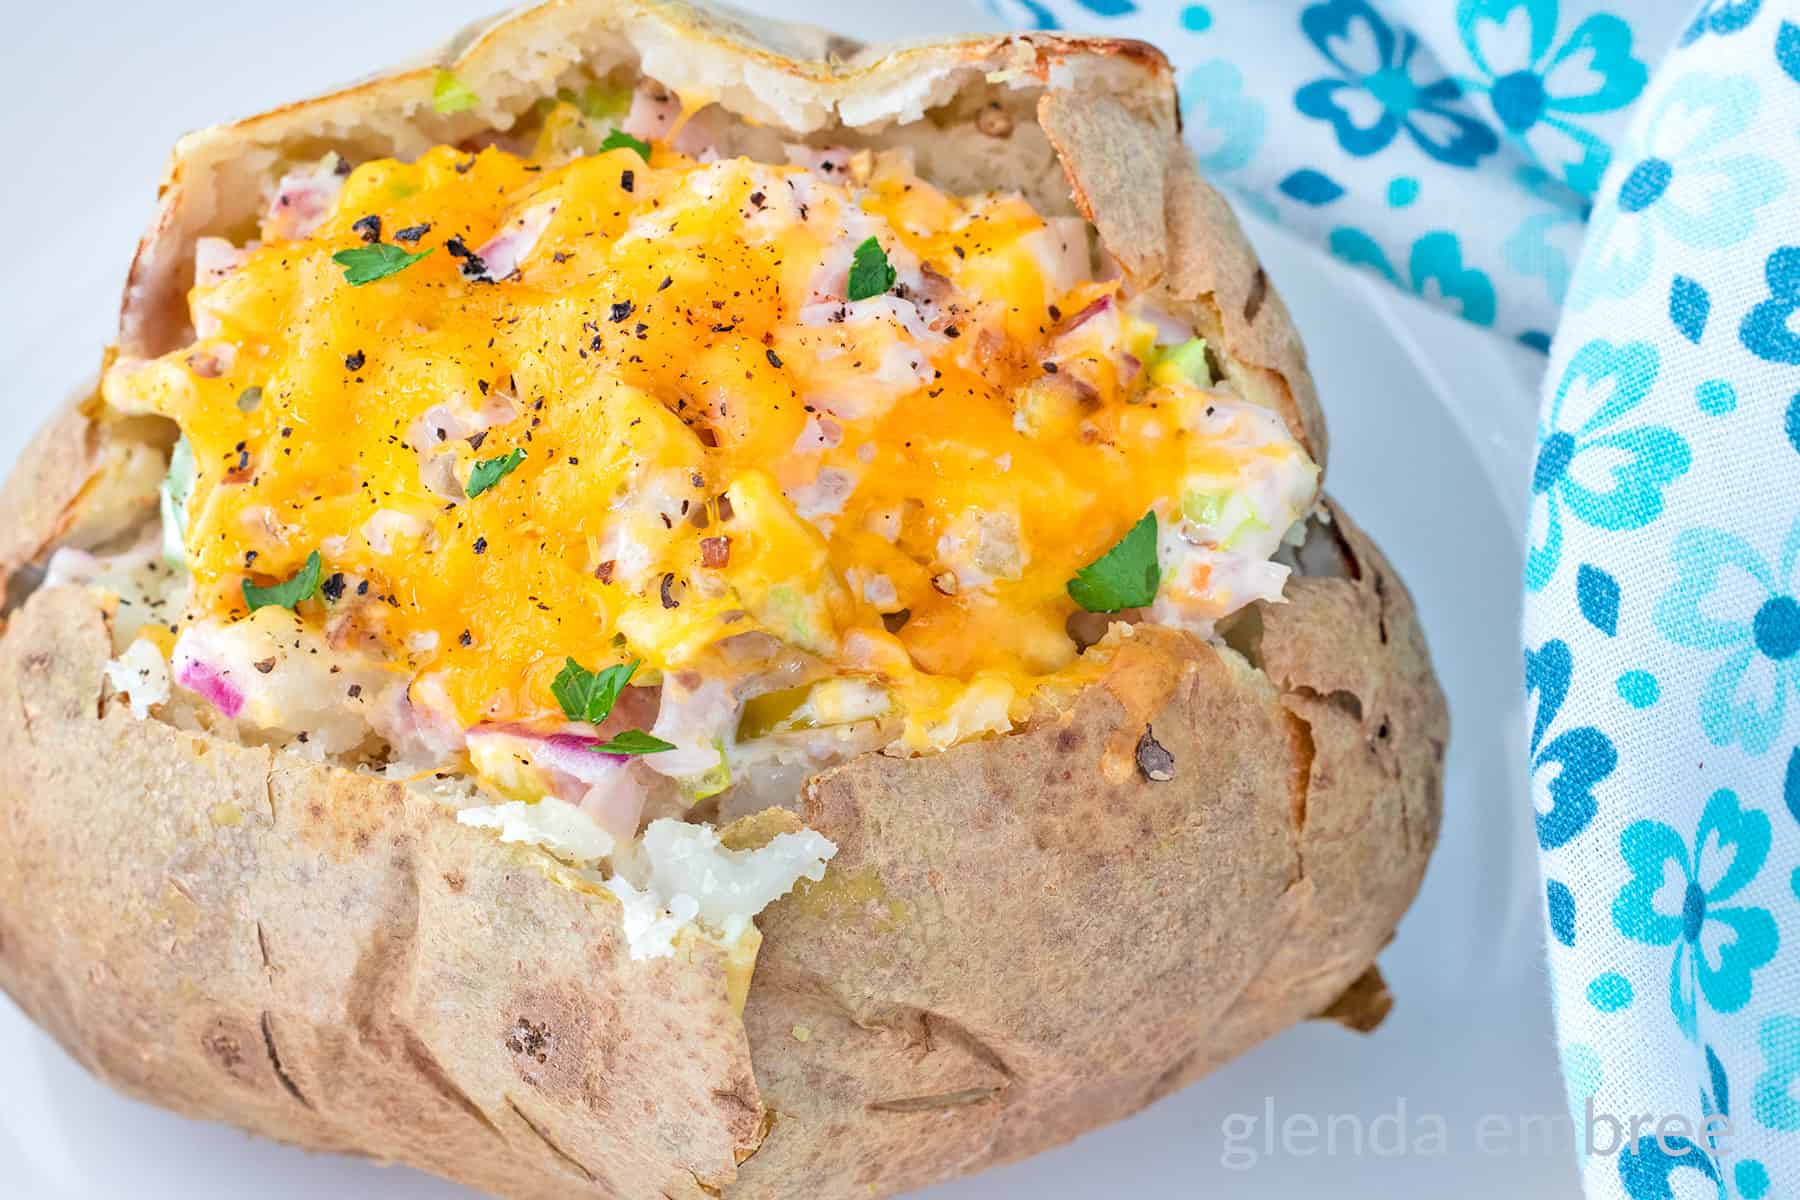 Baked Potato stuffed with Old Fashioned Ham salad and topped with melted cheddar cheese.